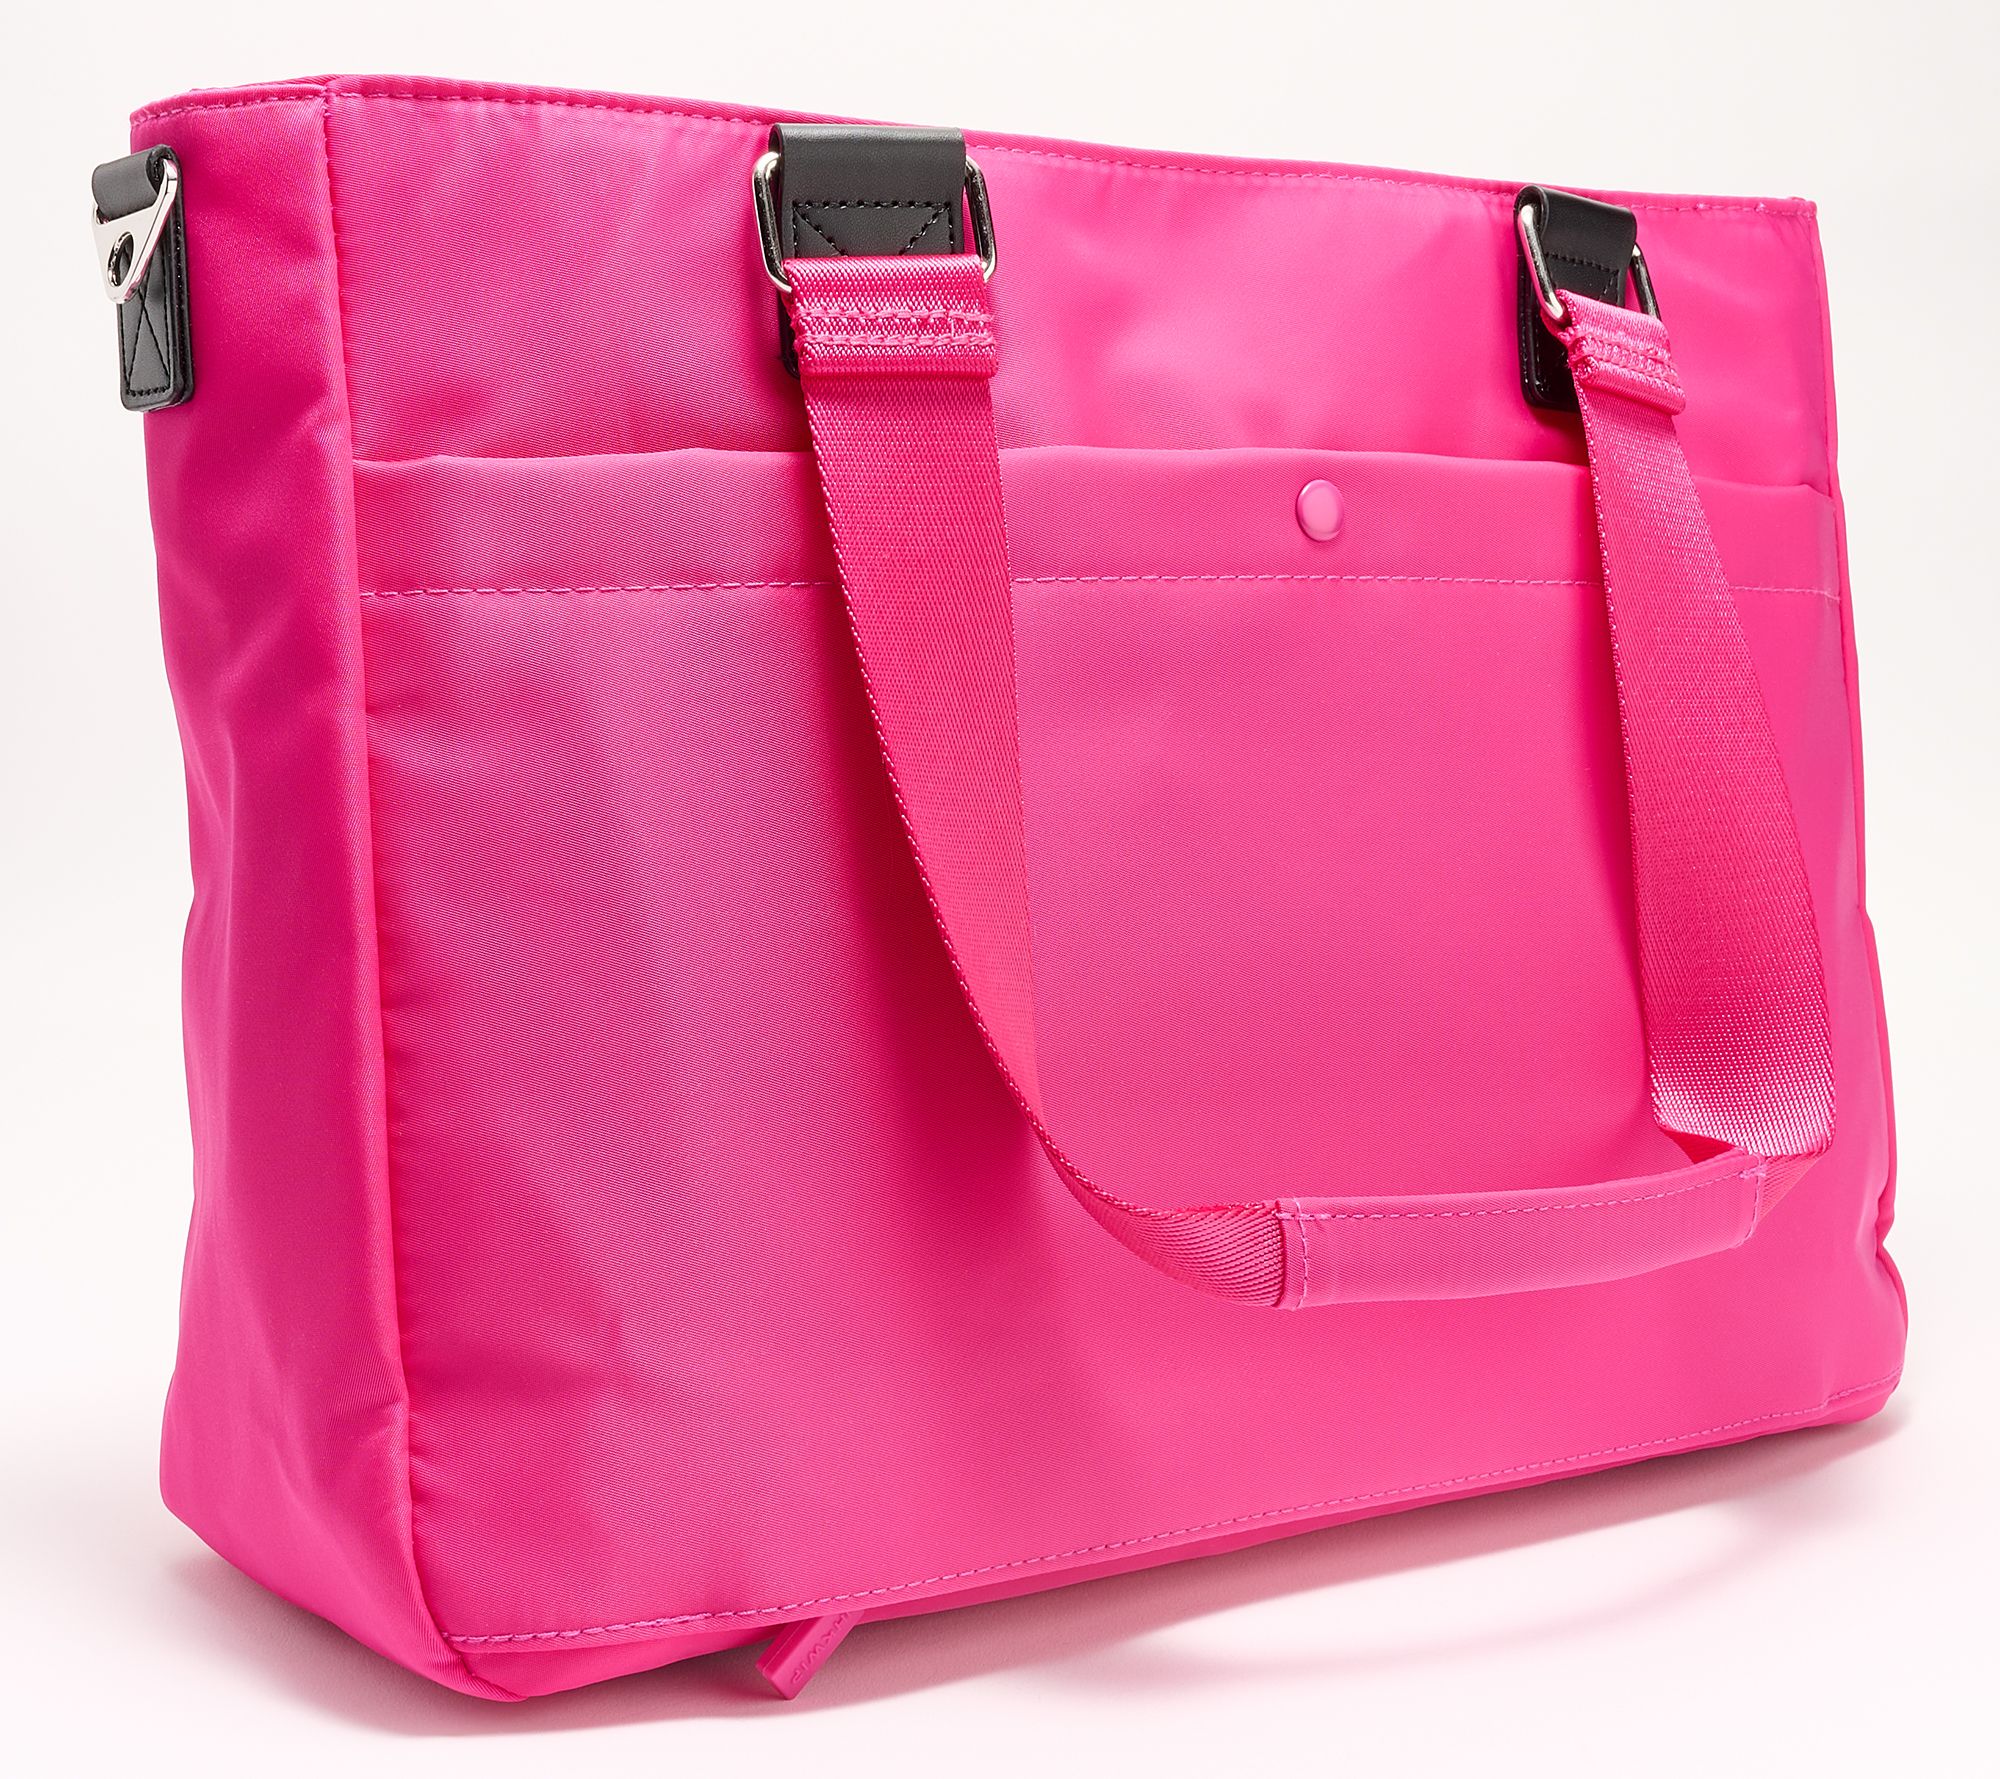 You Can Now Buy Real Simple Handbags on QVC